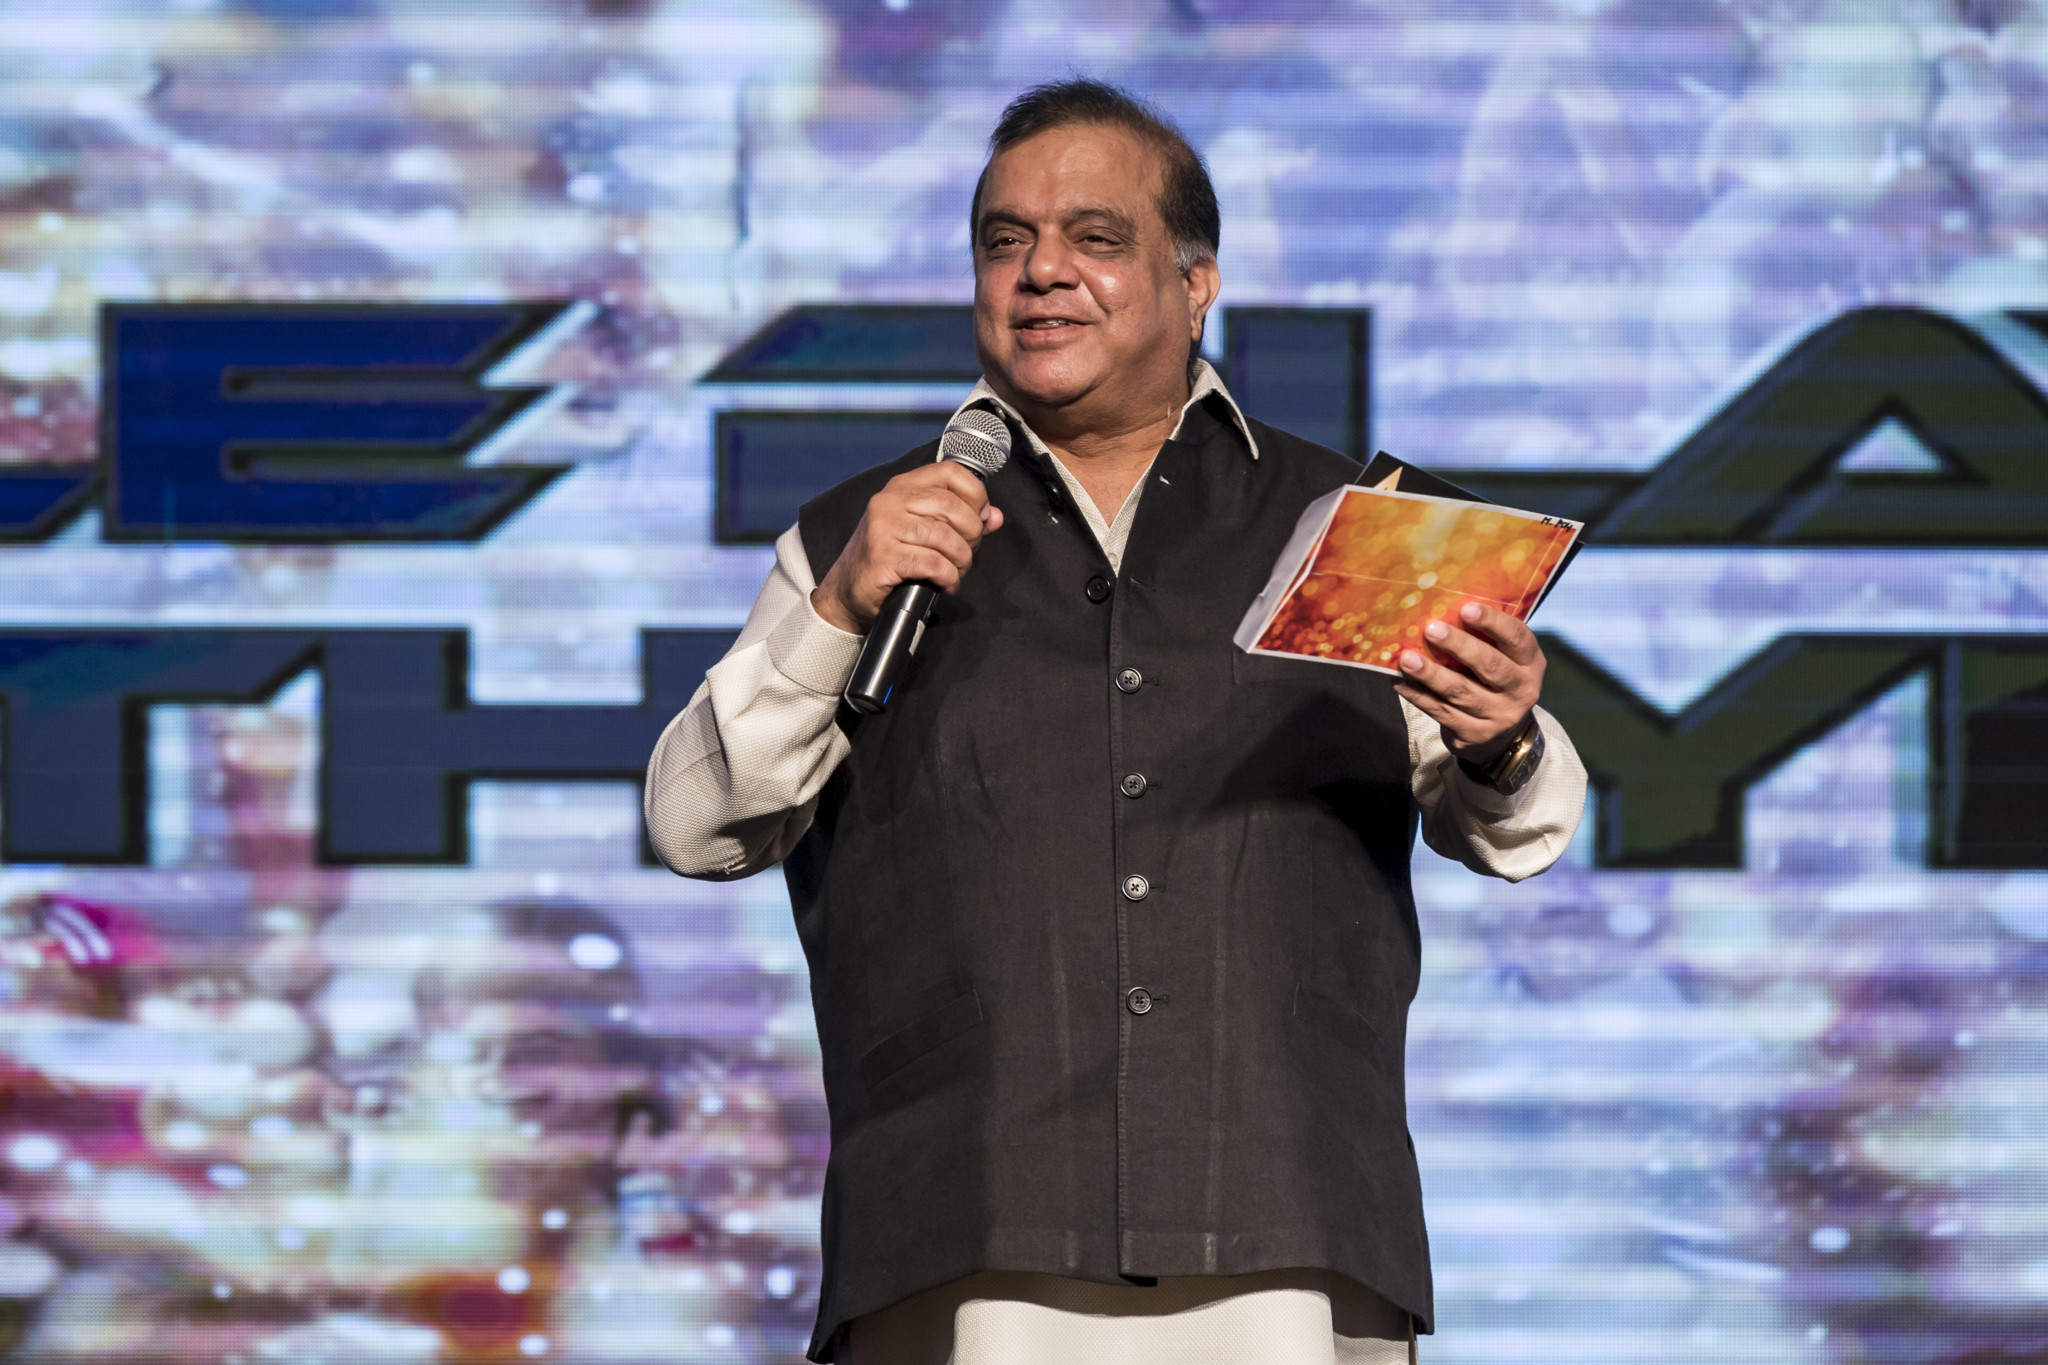 FIH President Narinder Batra has endured a difficult first year at the helm ©Getty Images